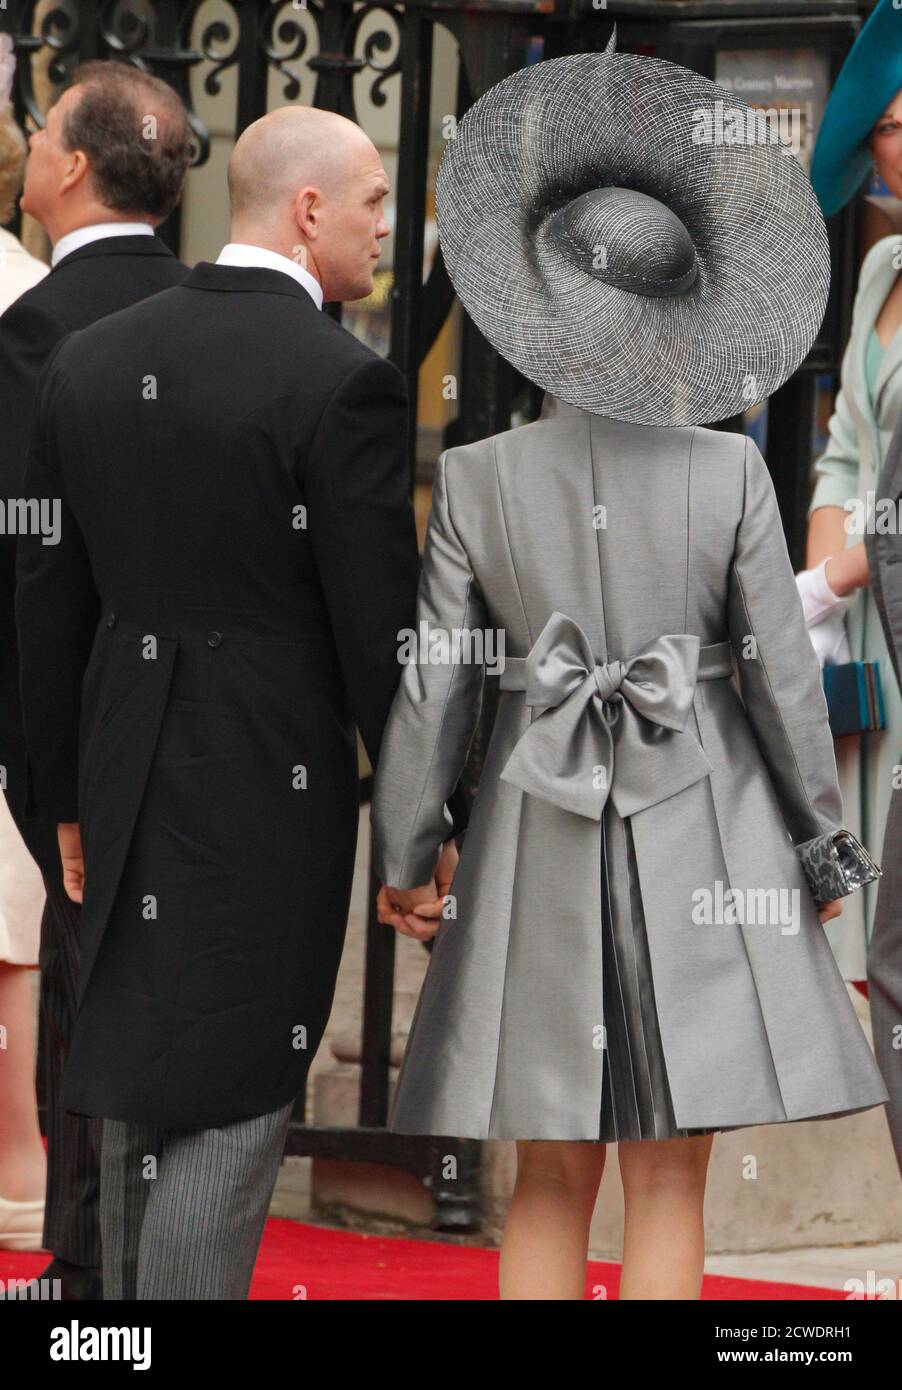 Zara Phillips and Mike Tindall arrive at Westminster Abbey before the  wedding of Britain's Prince William and Kate Middleton, in central London  April 29, 2011. (ROYAL WEDDING/VIP) REUTERS/Phil Noble (BRITAIN - Tags: